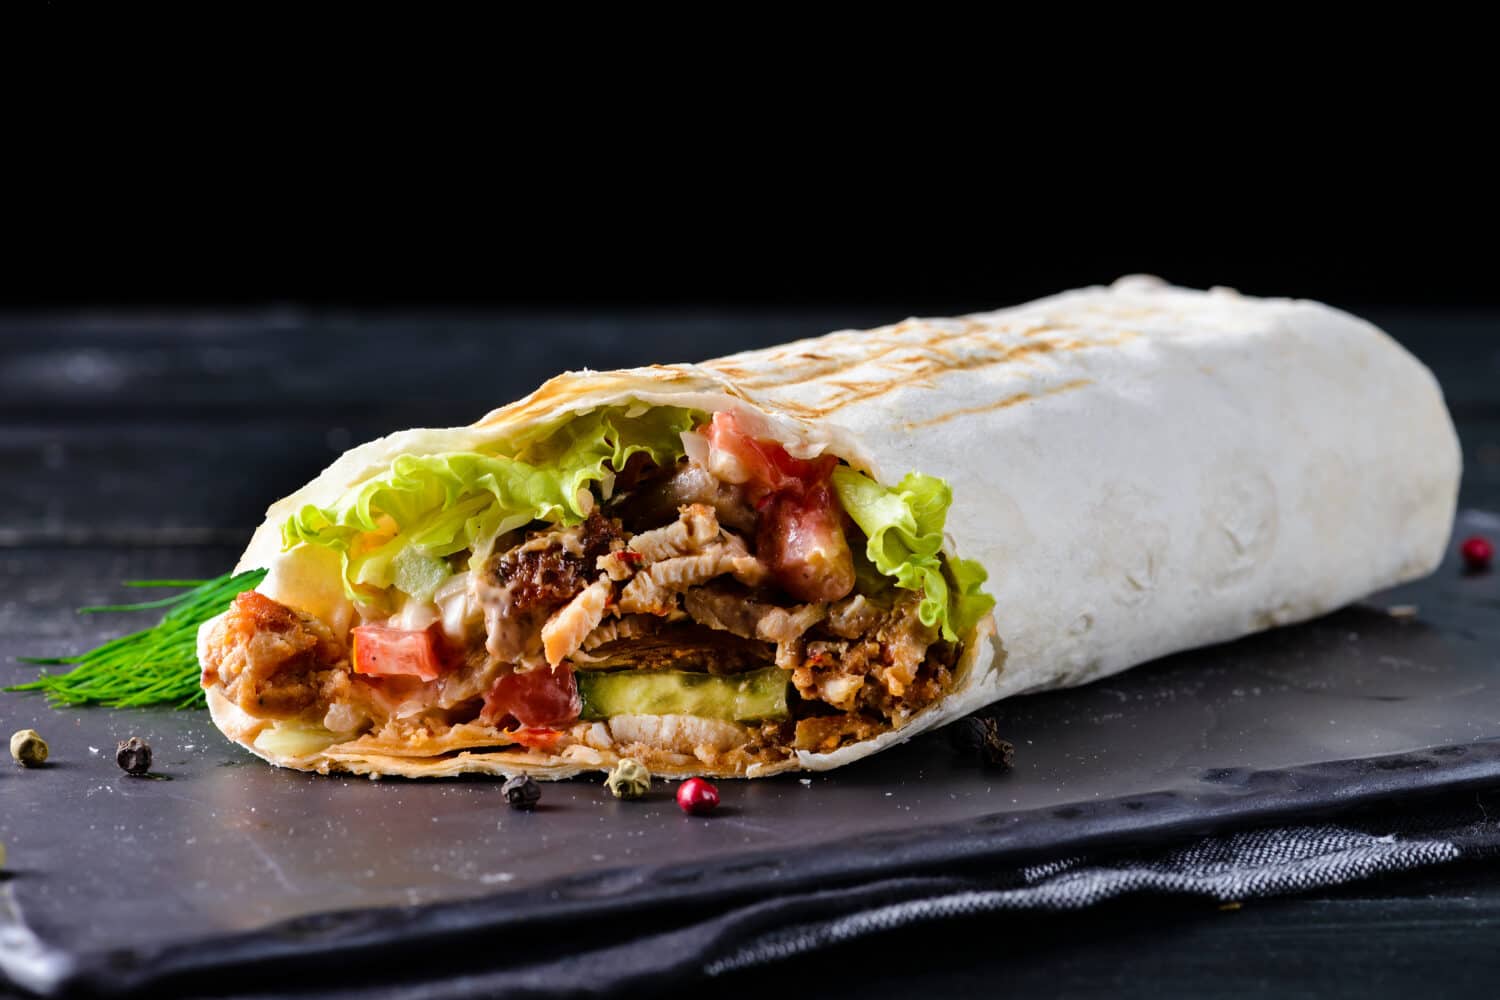 Traditional Mexican food, burritos with meat and beans, selective focus of beef steak burritos with vegetable